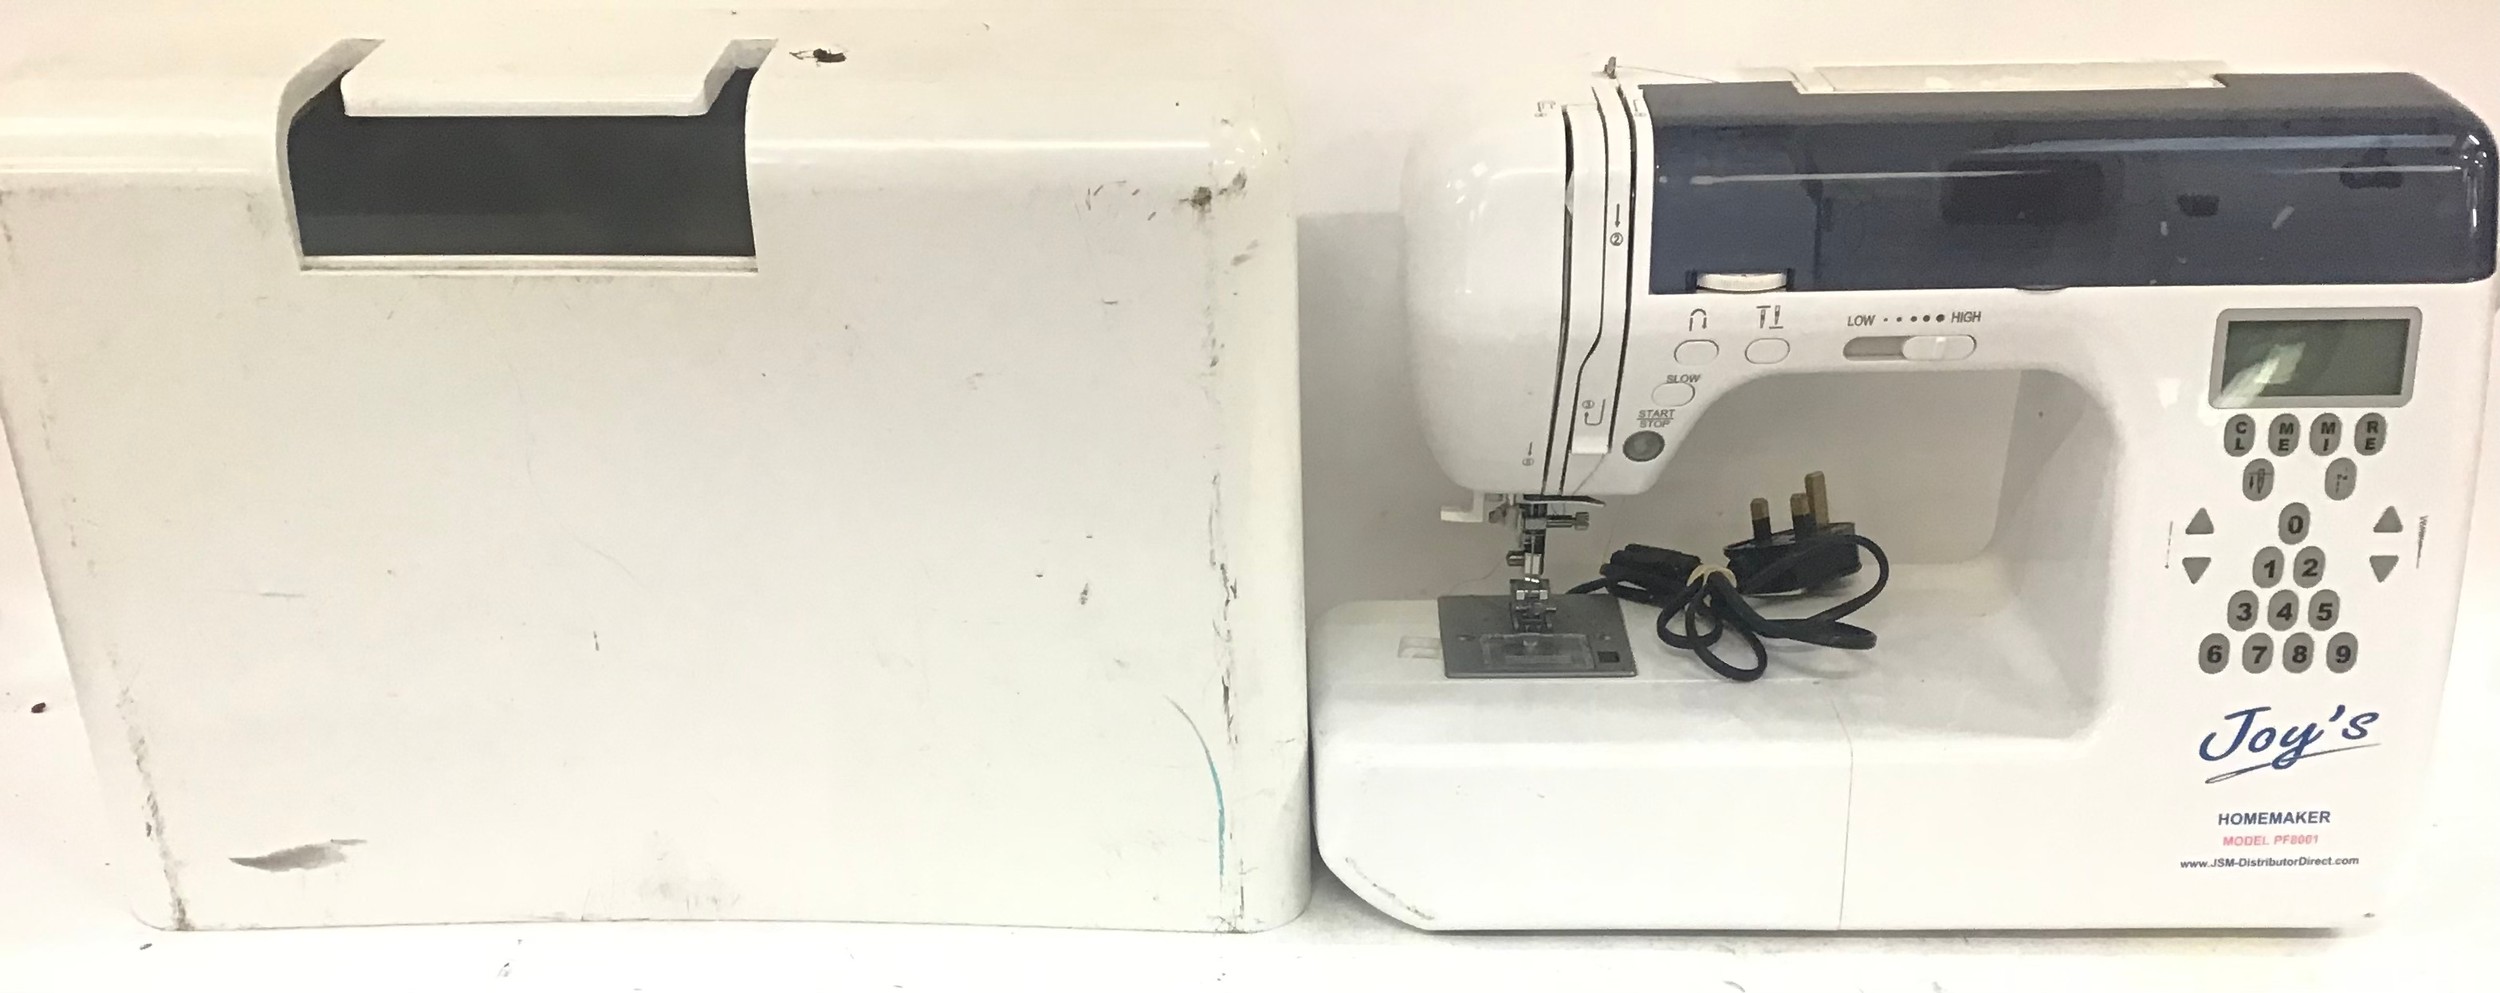 Joy’s Homemaker electric sewing machine model No. PF8001. - Image 2 of 2